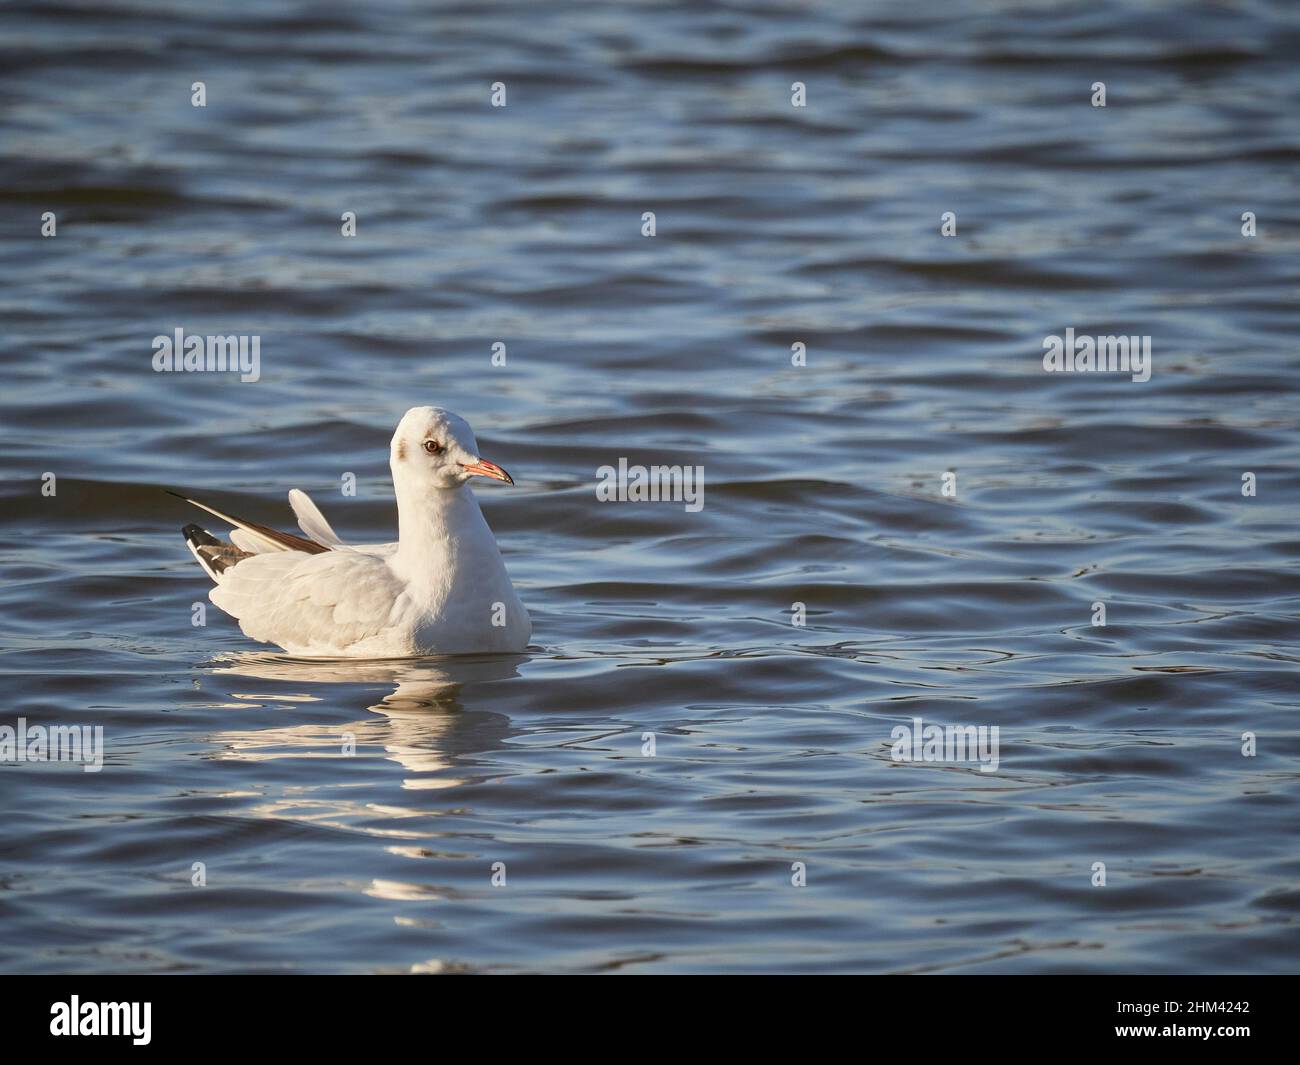 A Common Gull (Larus Canus) or Seagull on its own floating on the surface of a lake in January, UK Stock Photo